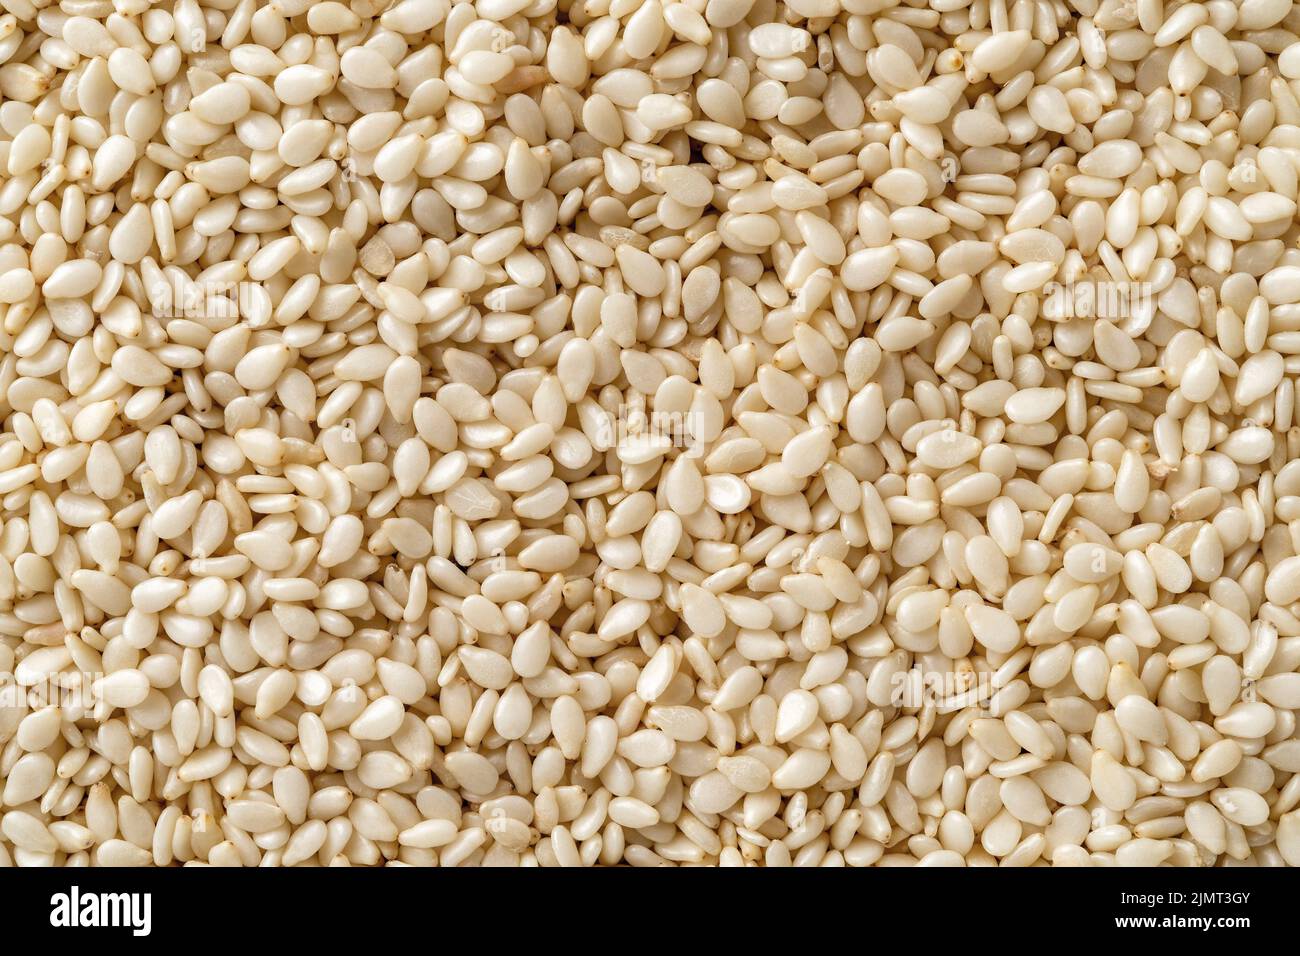 Raw sesame seeds macro background. Texture of organic benne grains closeup. White til for healthy food,  strengthening immunity diet,  calcium source. Stock Photo